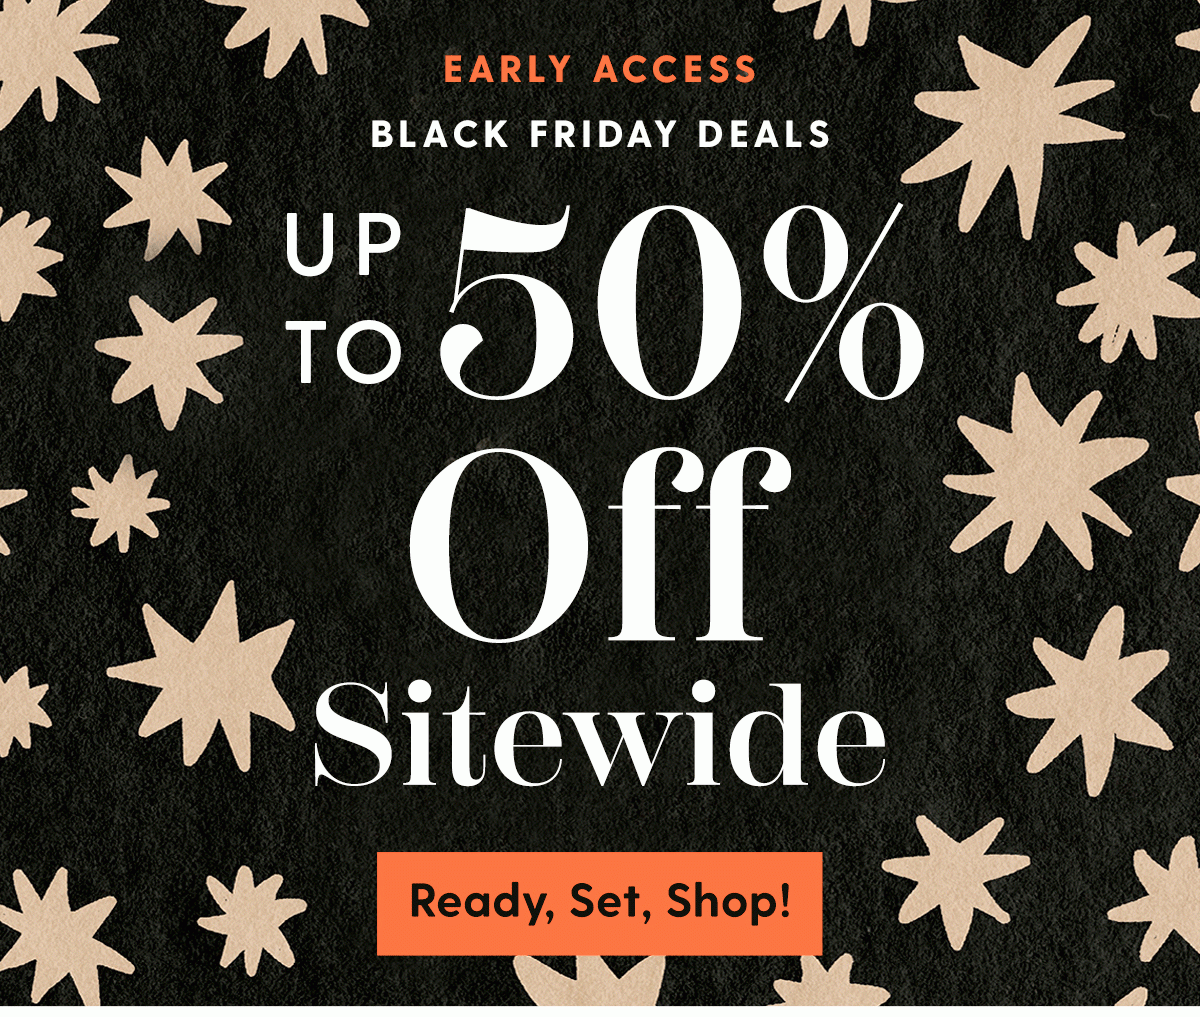 EARLY ACCESS Black Friday Deals | Up to 50% Off Sitewide | Ready, Set, Shop!